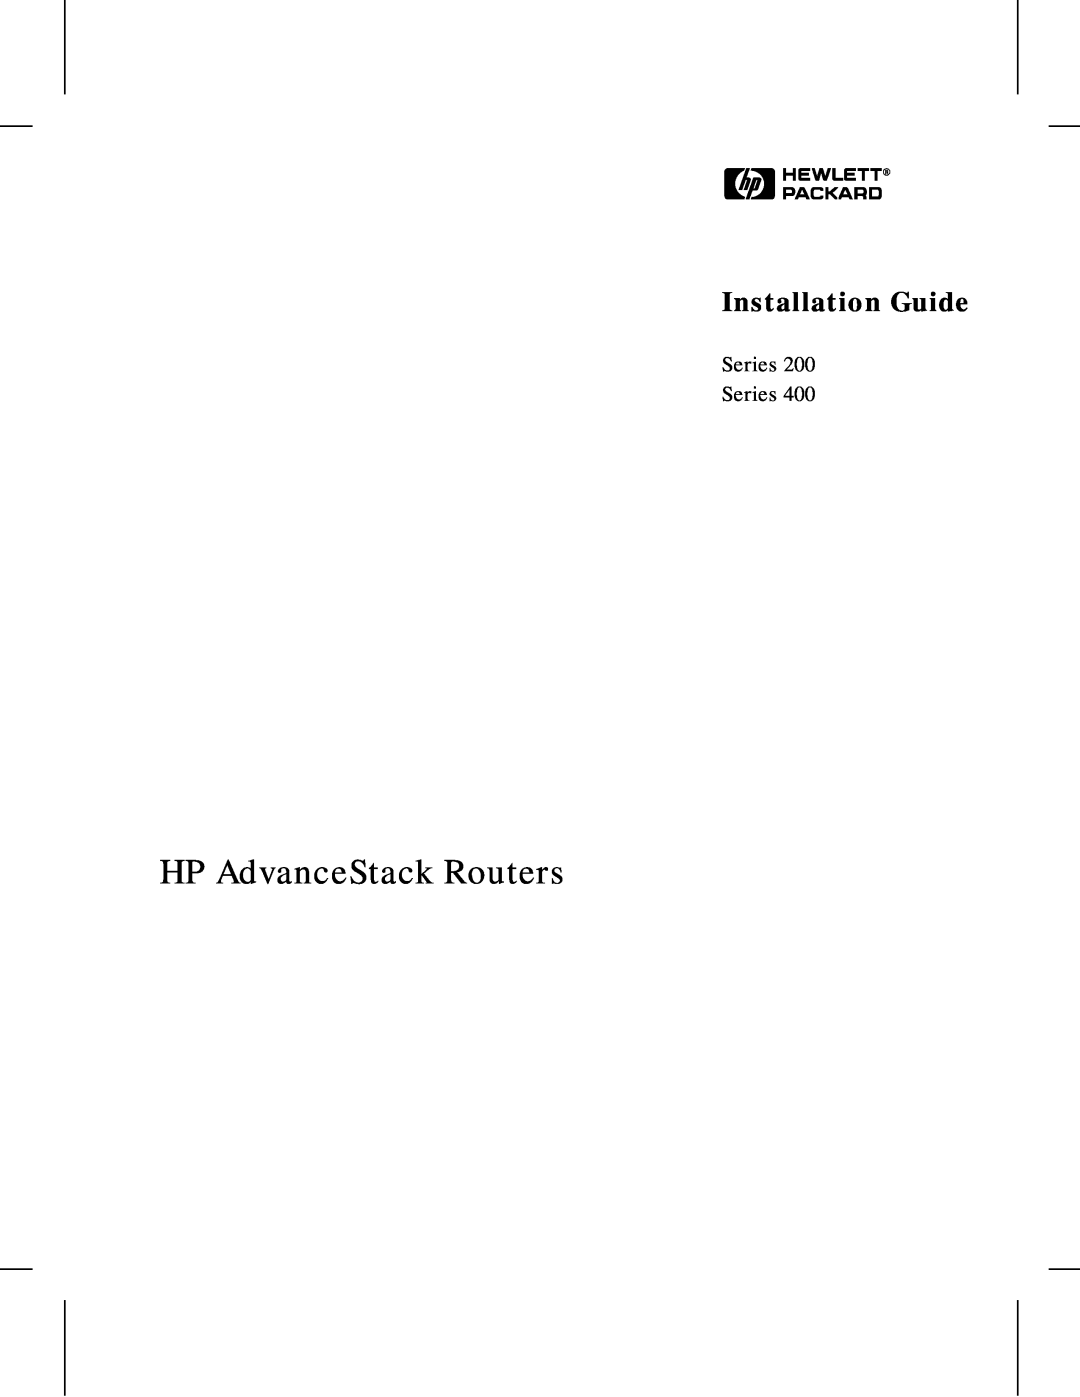 HP 480 manual HP AdvanceStack Routers, Installation Guide, Series Series 